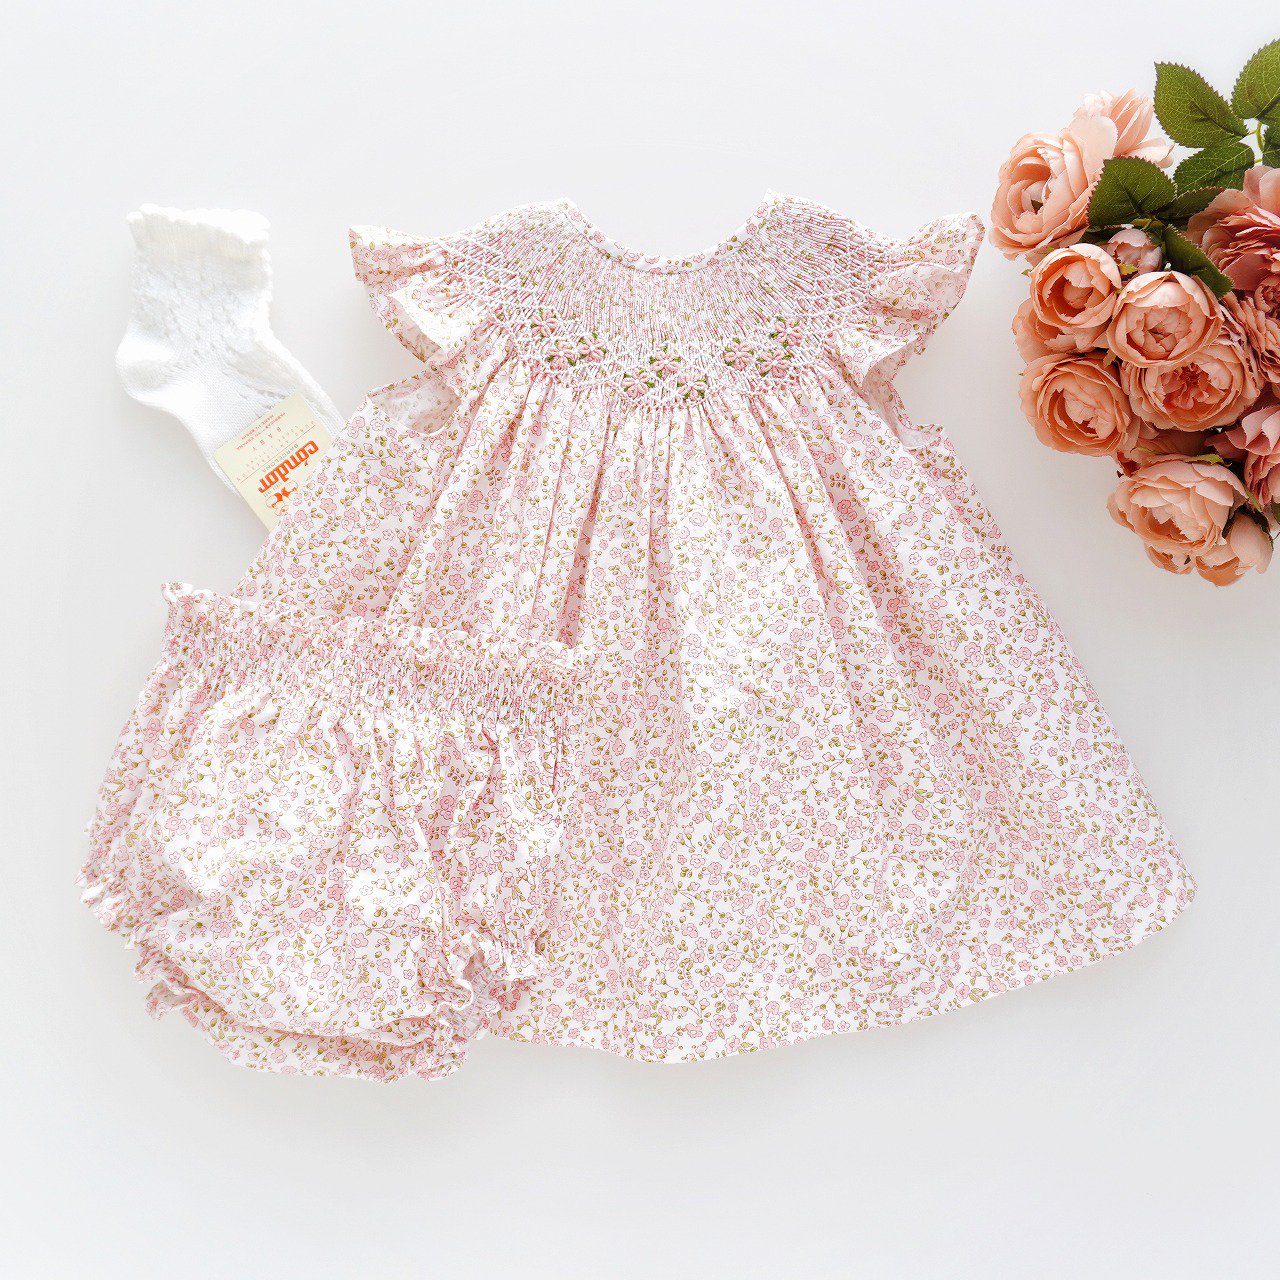 <img class='new_mark_img1' src='https://img.shop-pro.jp/img/new/icons1.gif' style='border:none;display:inline;margin:0px;padding:0px;width:auto;' />dBb ideas - Rosa floral smocked set